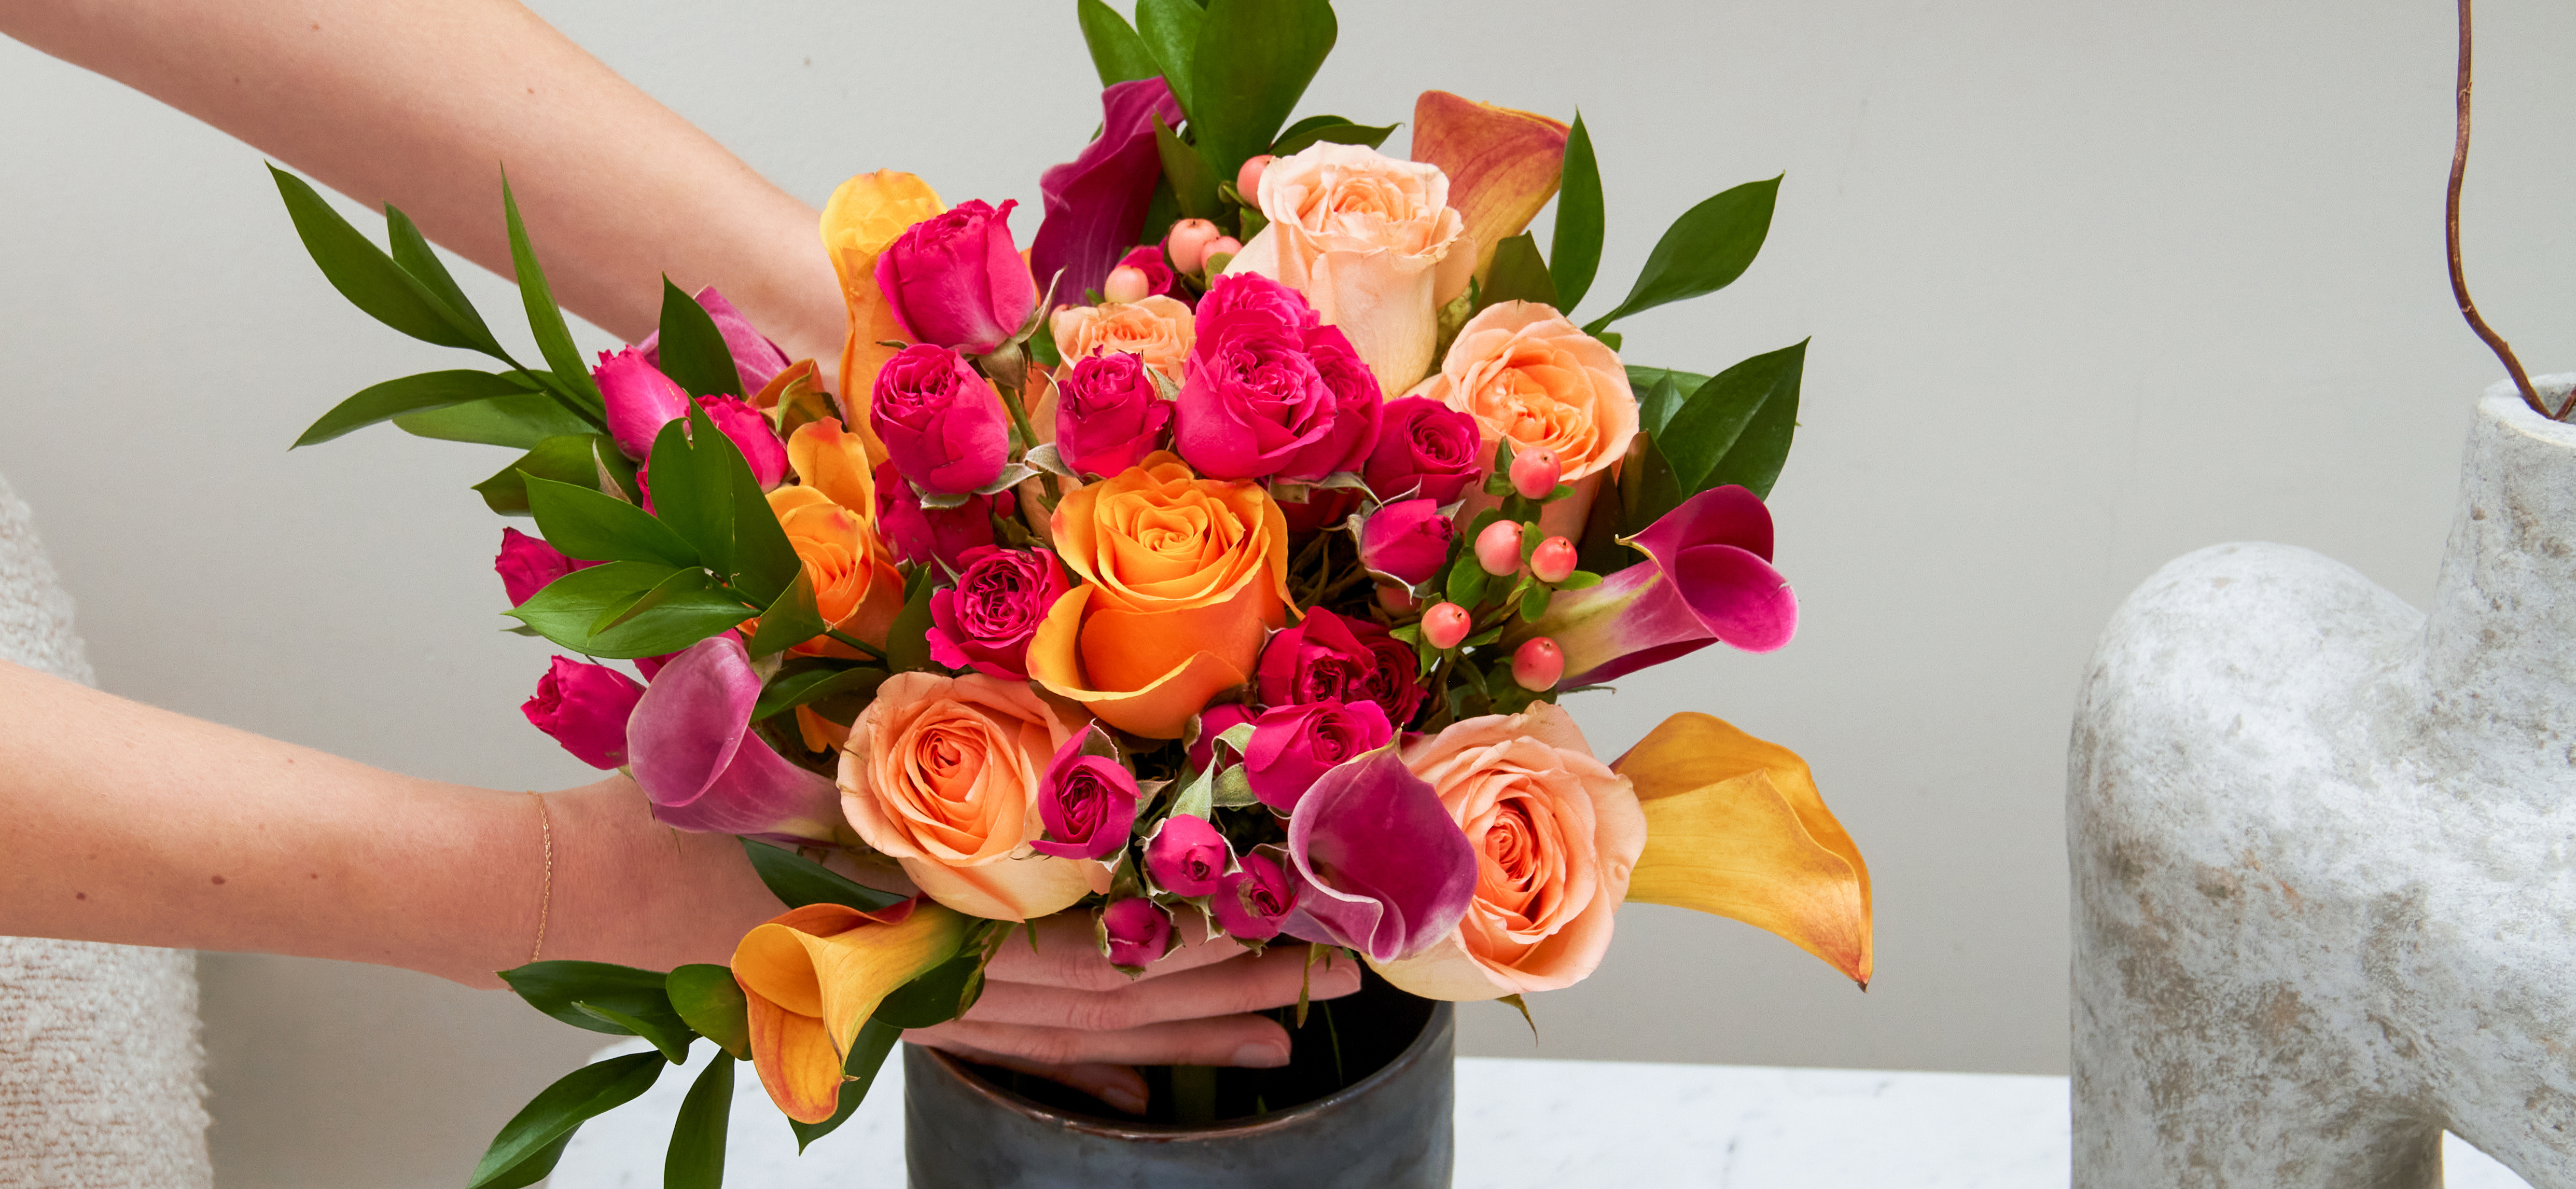 Bouquet of roses, the June birth flower